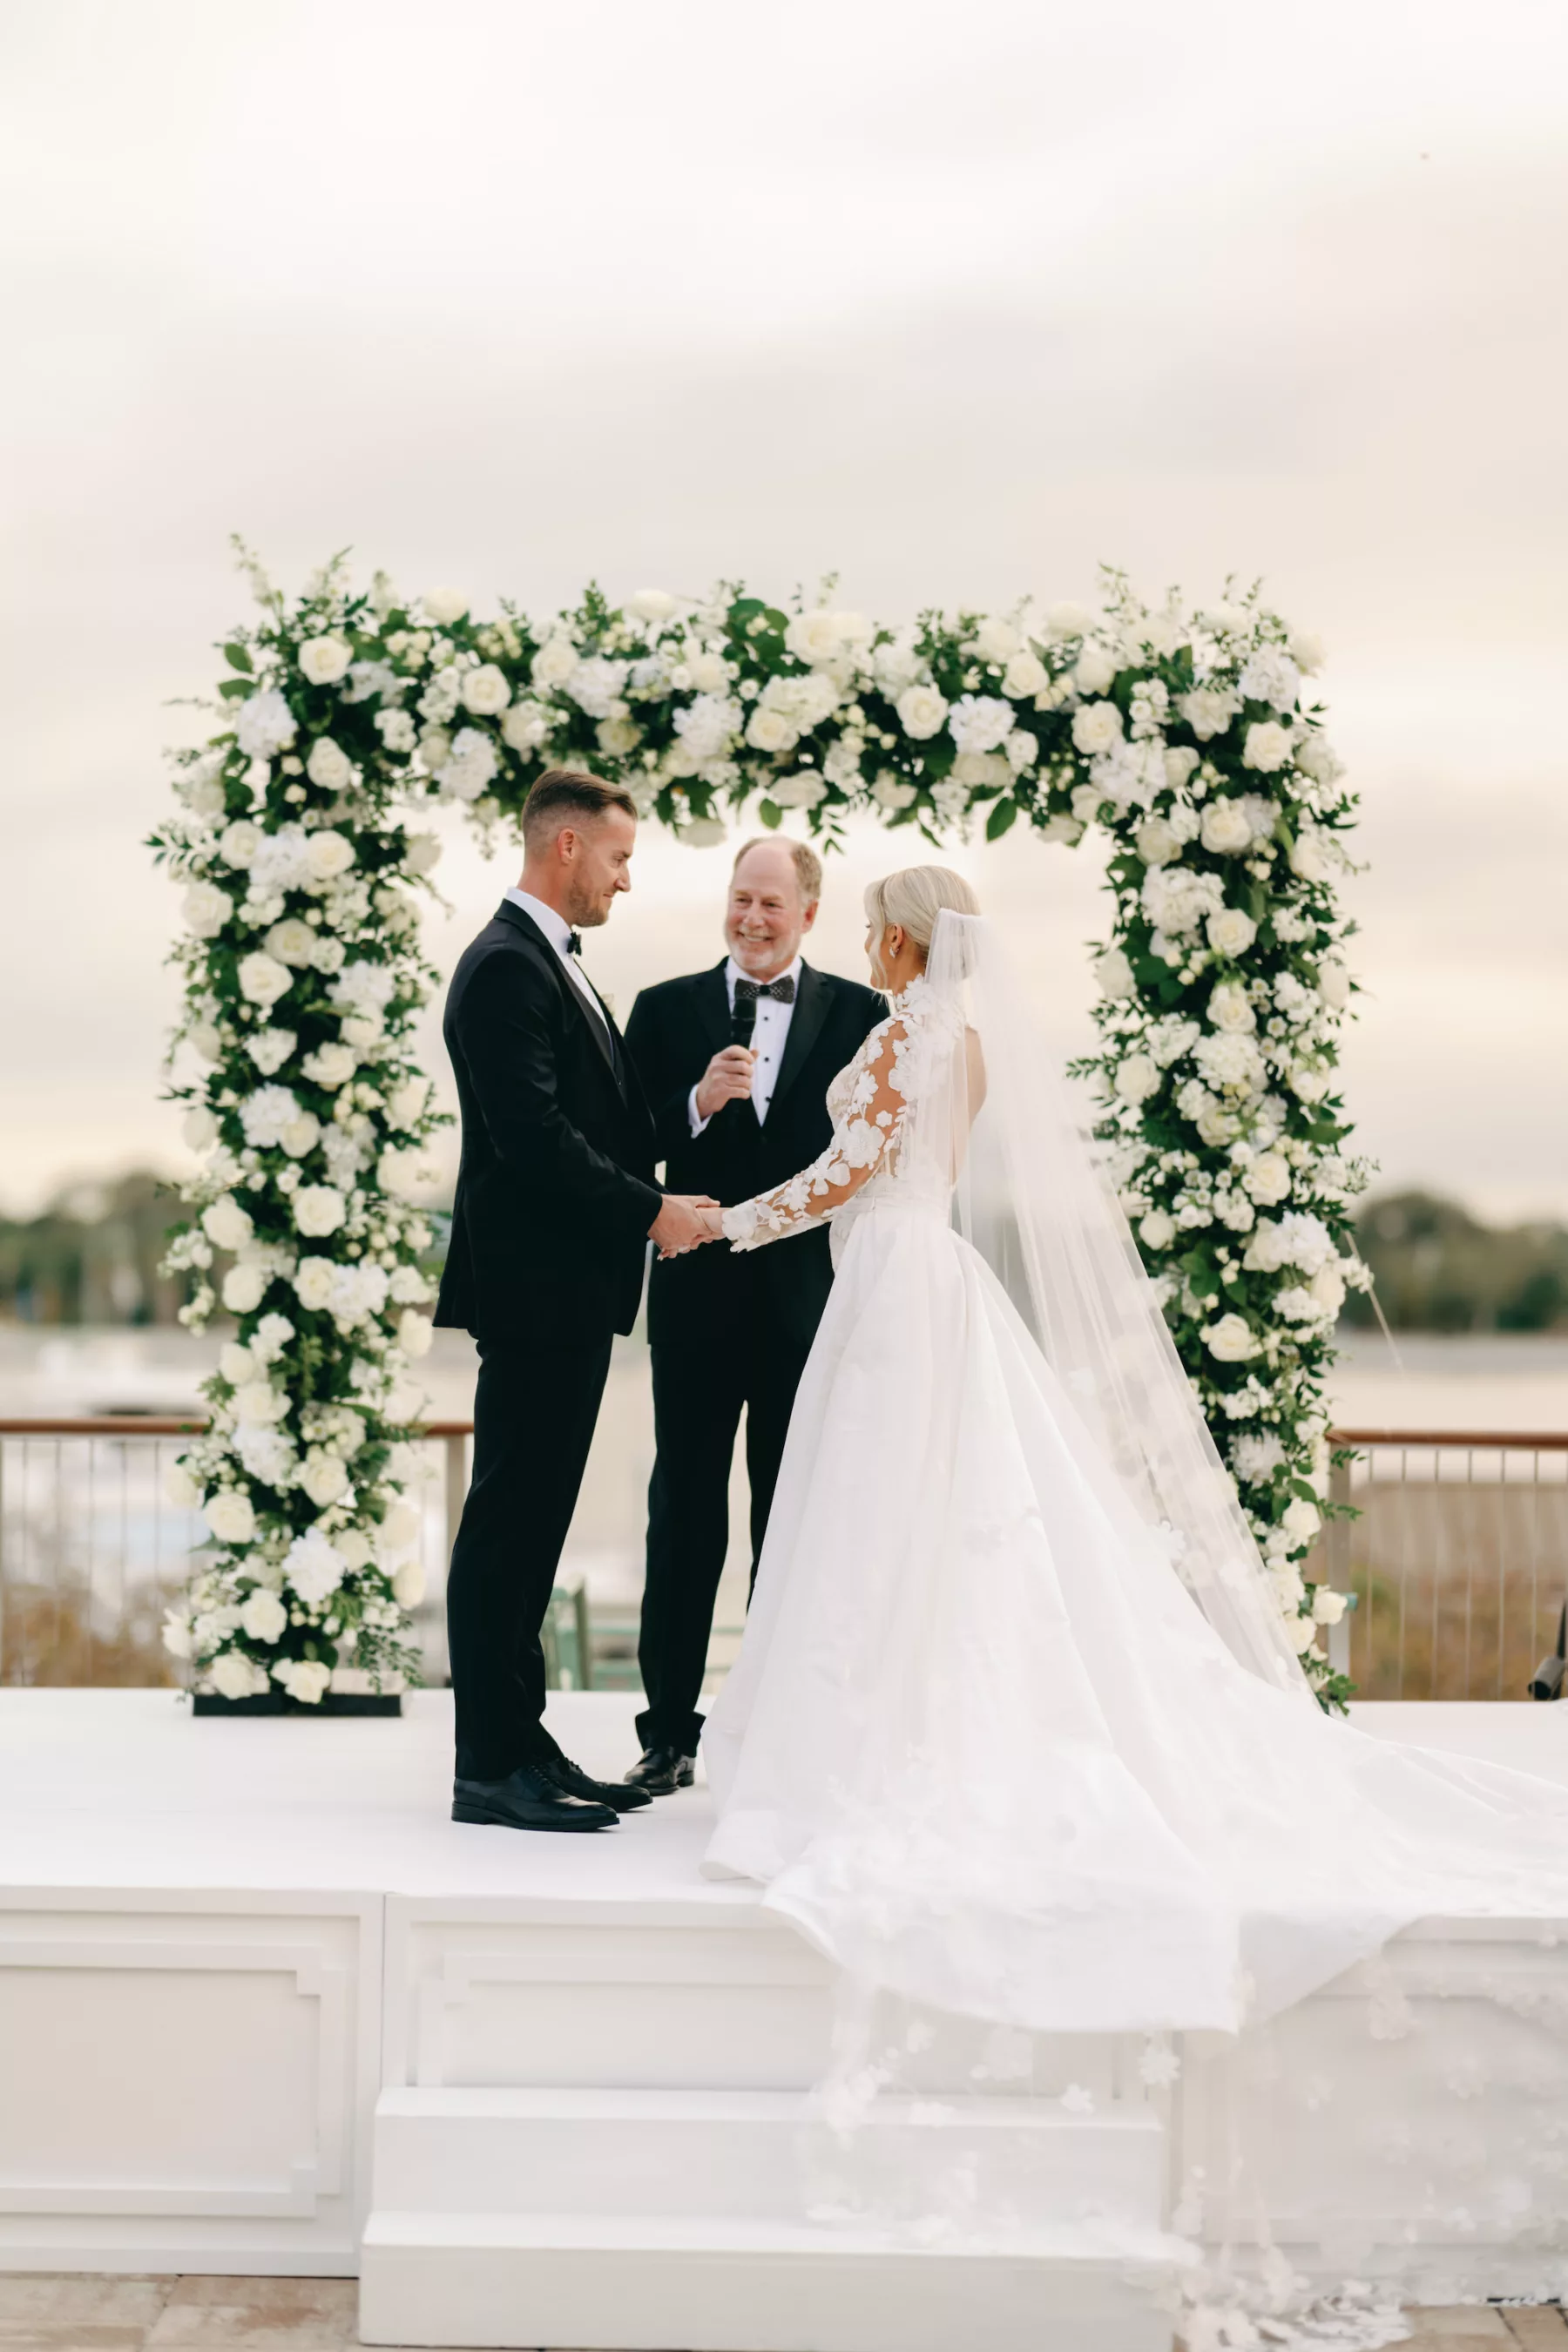 White Roses and Greenery Wedding Ceremony Altar Arch and Stage Decor Ideas | St Pete Historic Hotel Venue The Vinoy